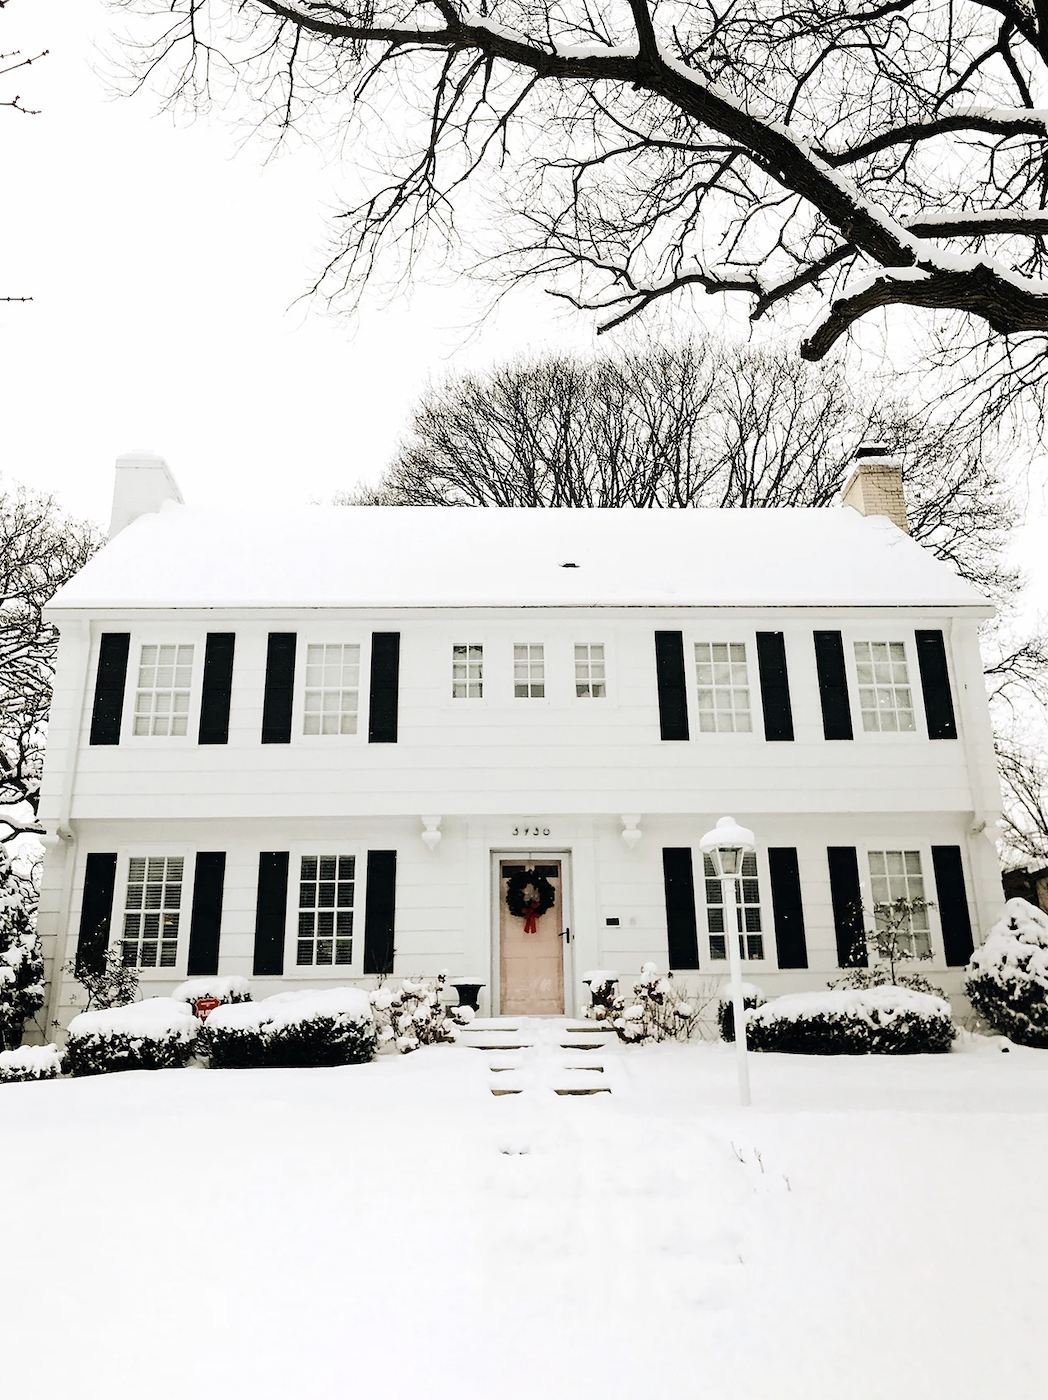 Domino: 5 Cozy Houses That Nail Cold-Weather Curb Appeal